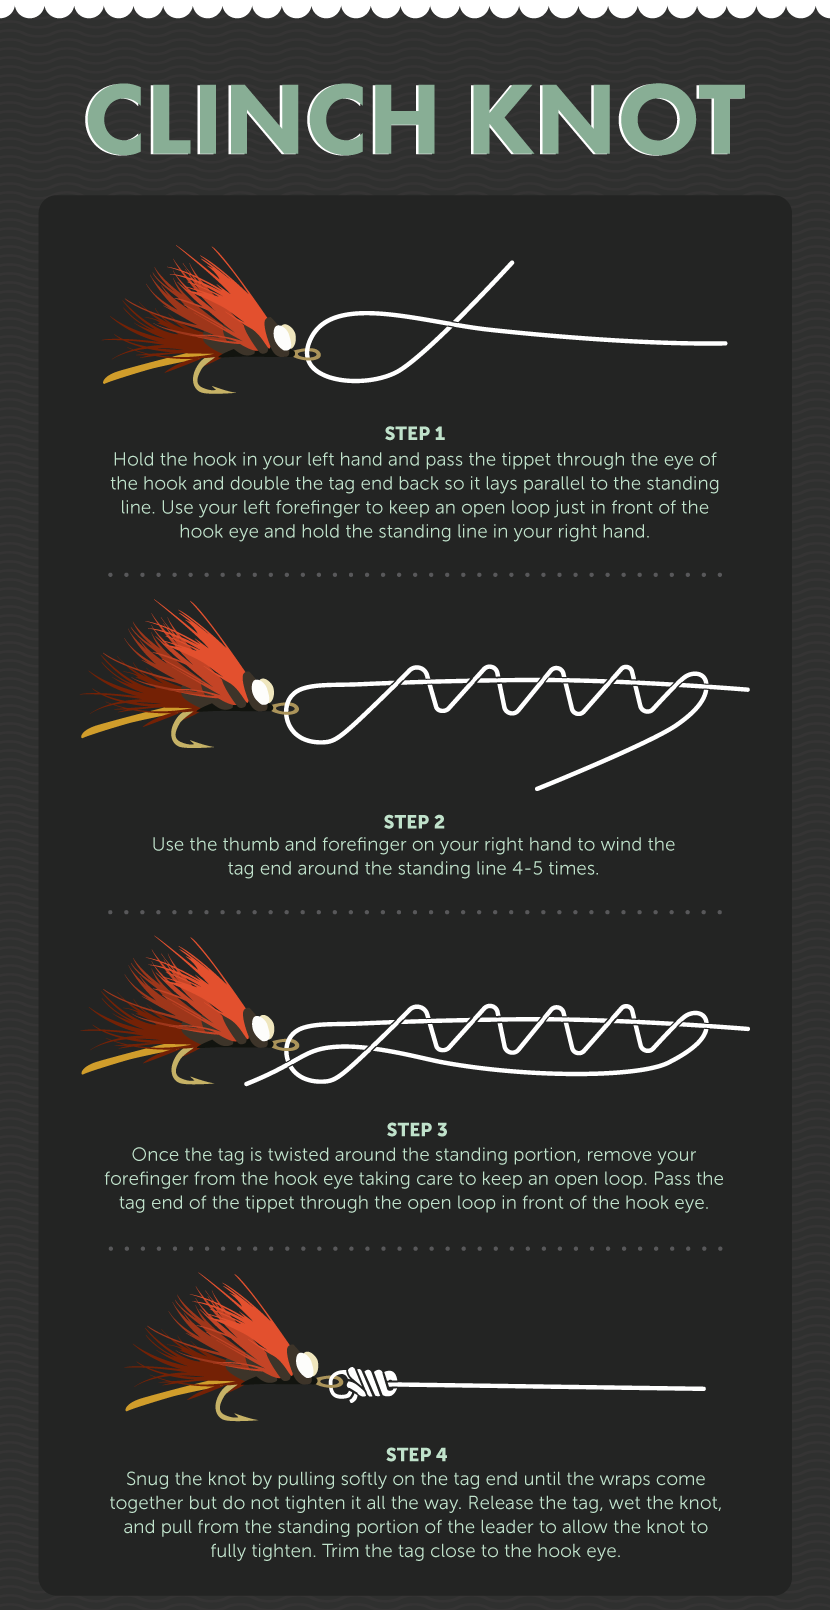 Seven knots for attaching a fly to leader/tippet material, and how